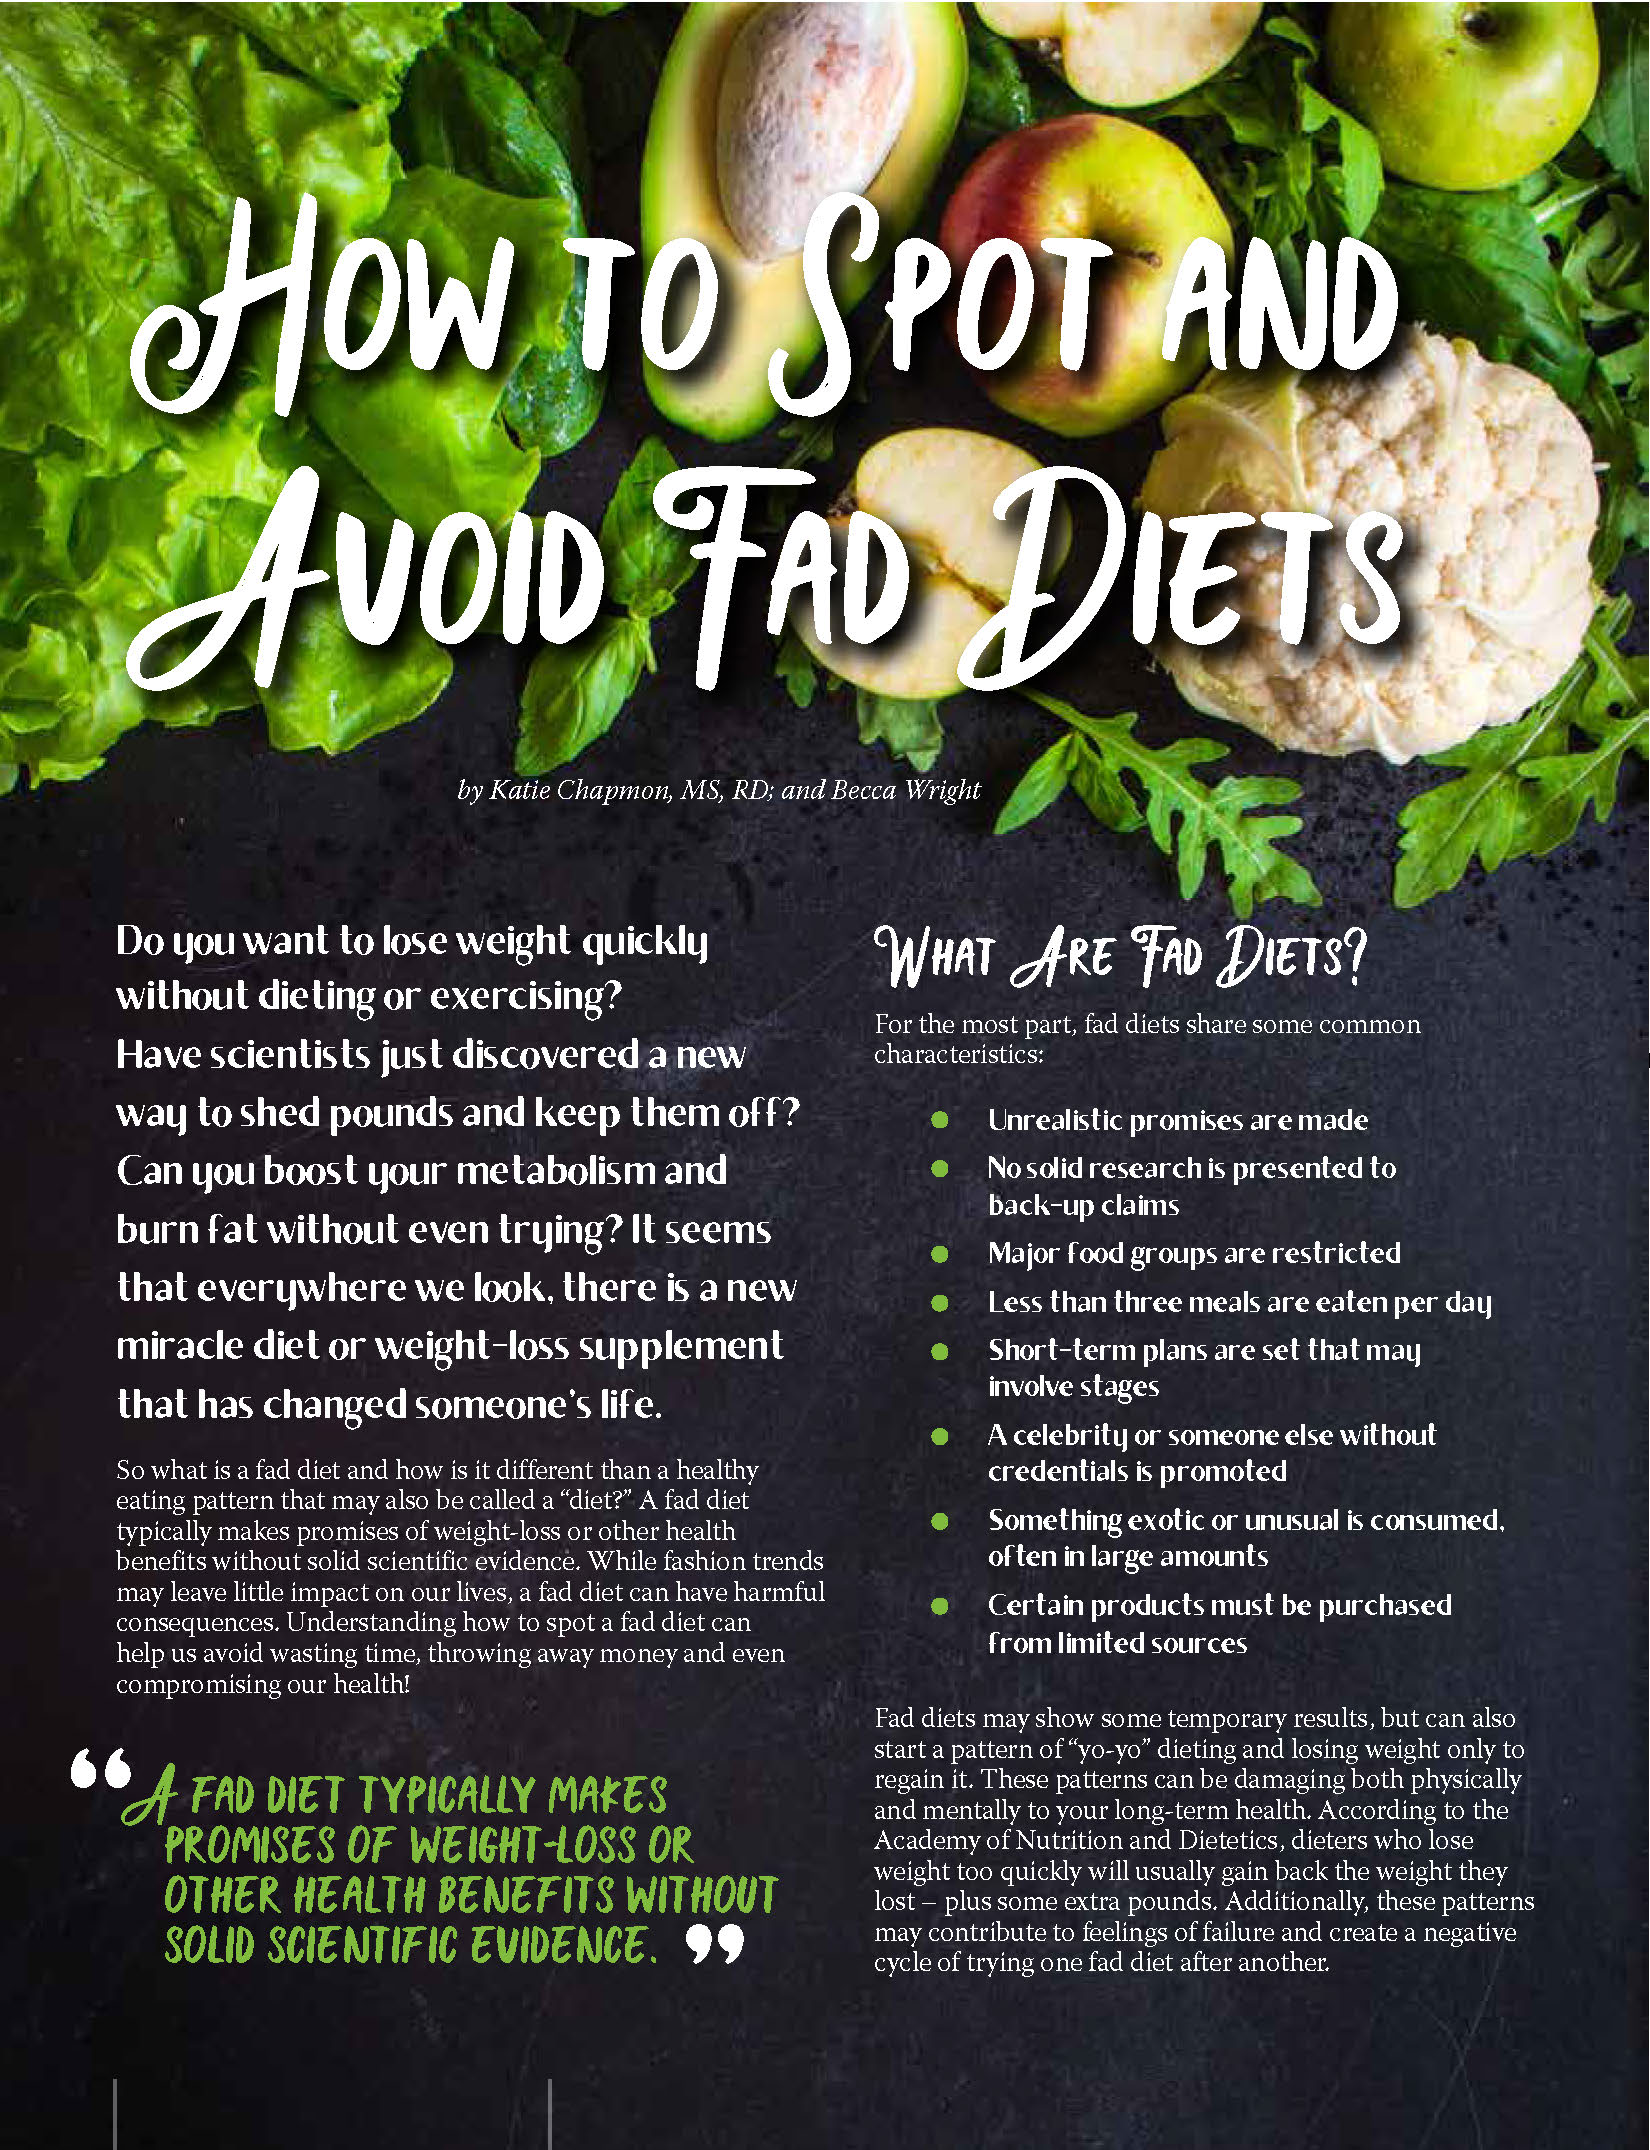 How to Spot and Avoid Fad Diets - Obesity Action Coalition